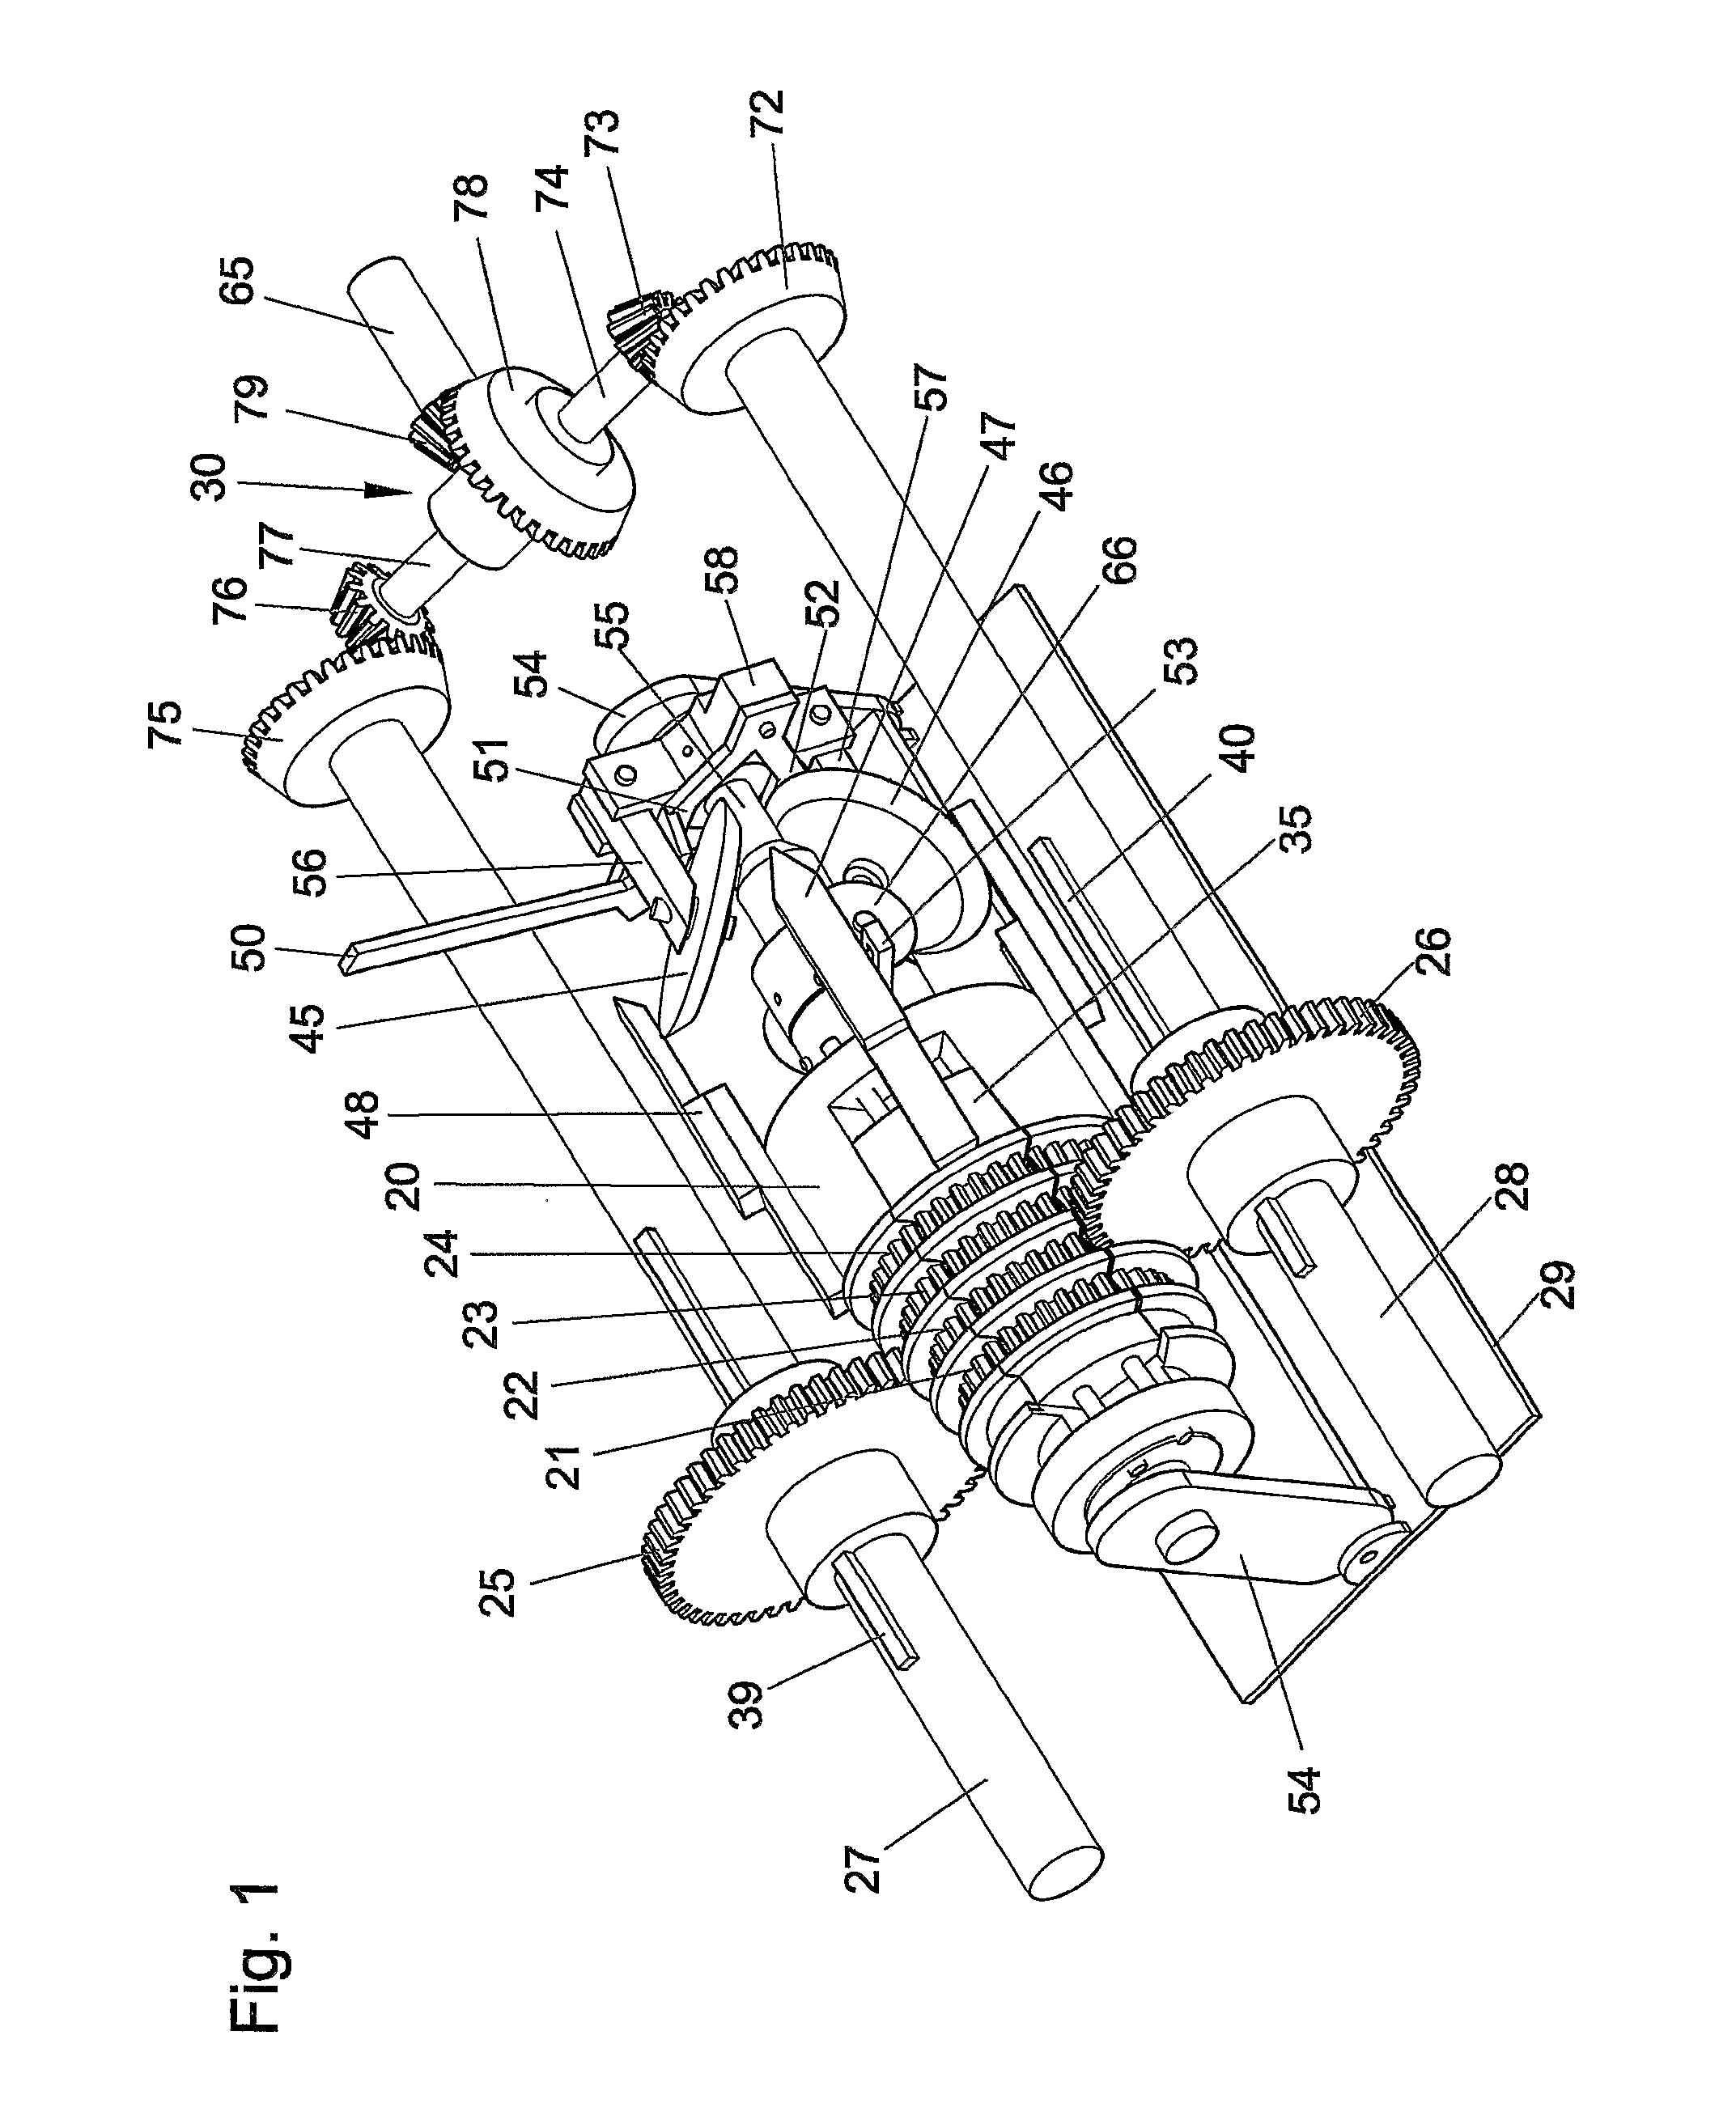 Gear-based continuously engaged variable transmission